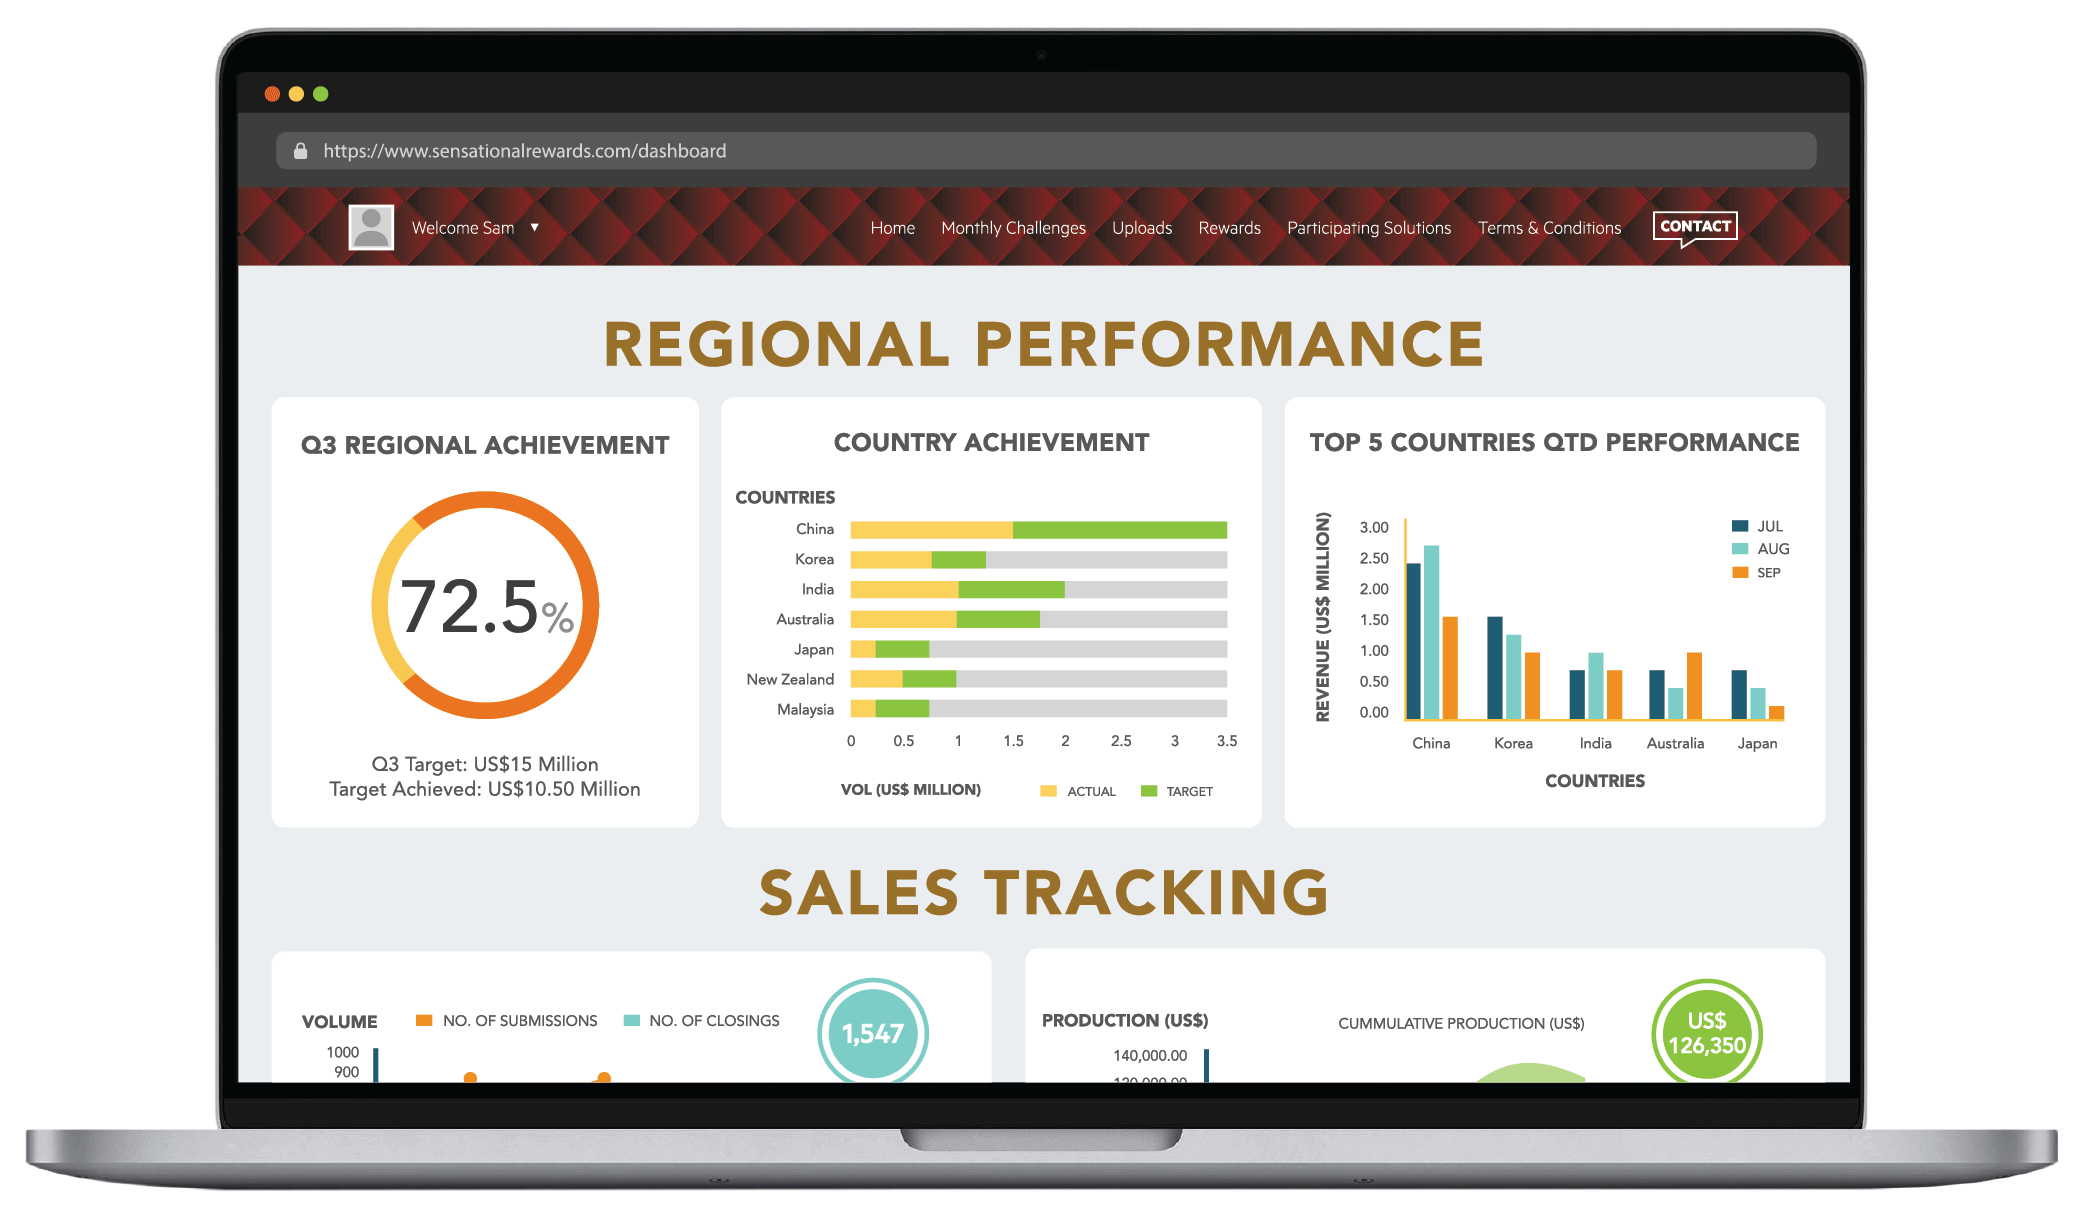 Peronalised CRM dashboard reflects real-time regional and individual sales performance